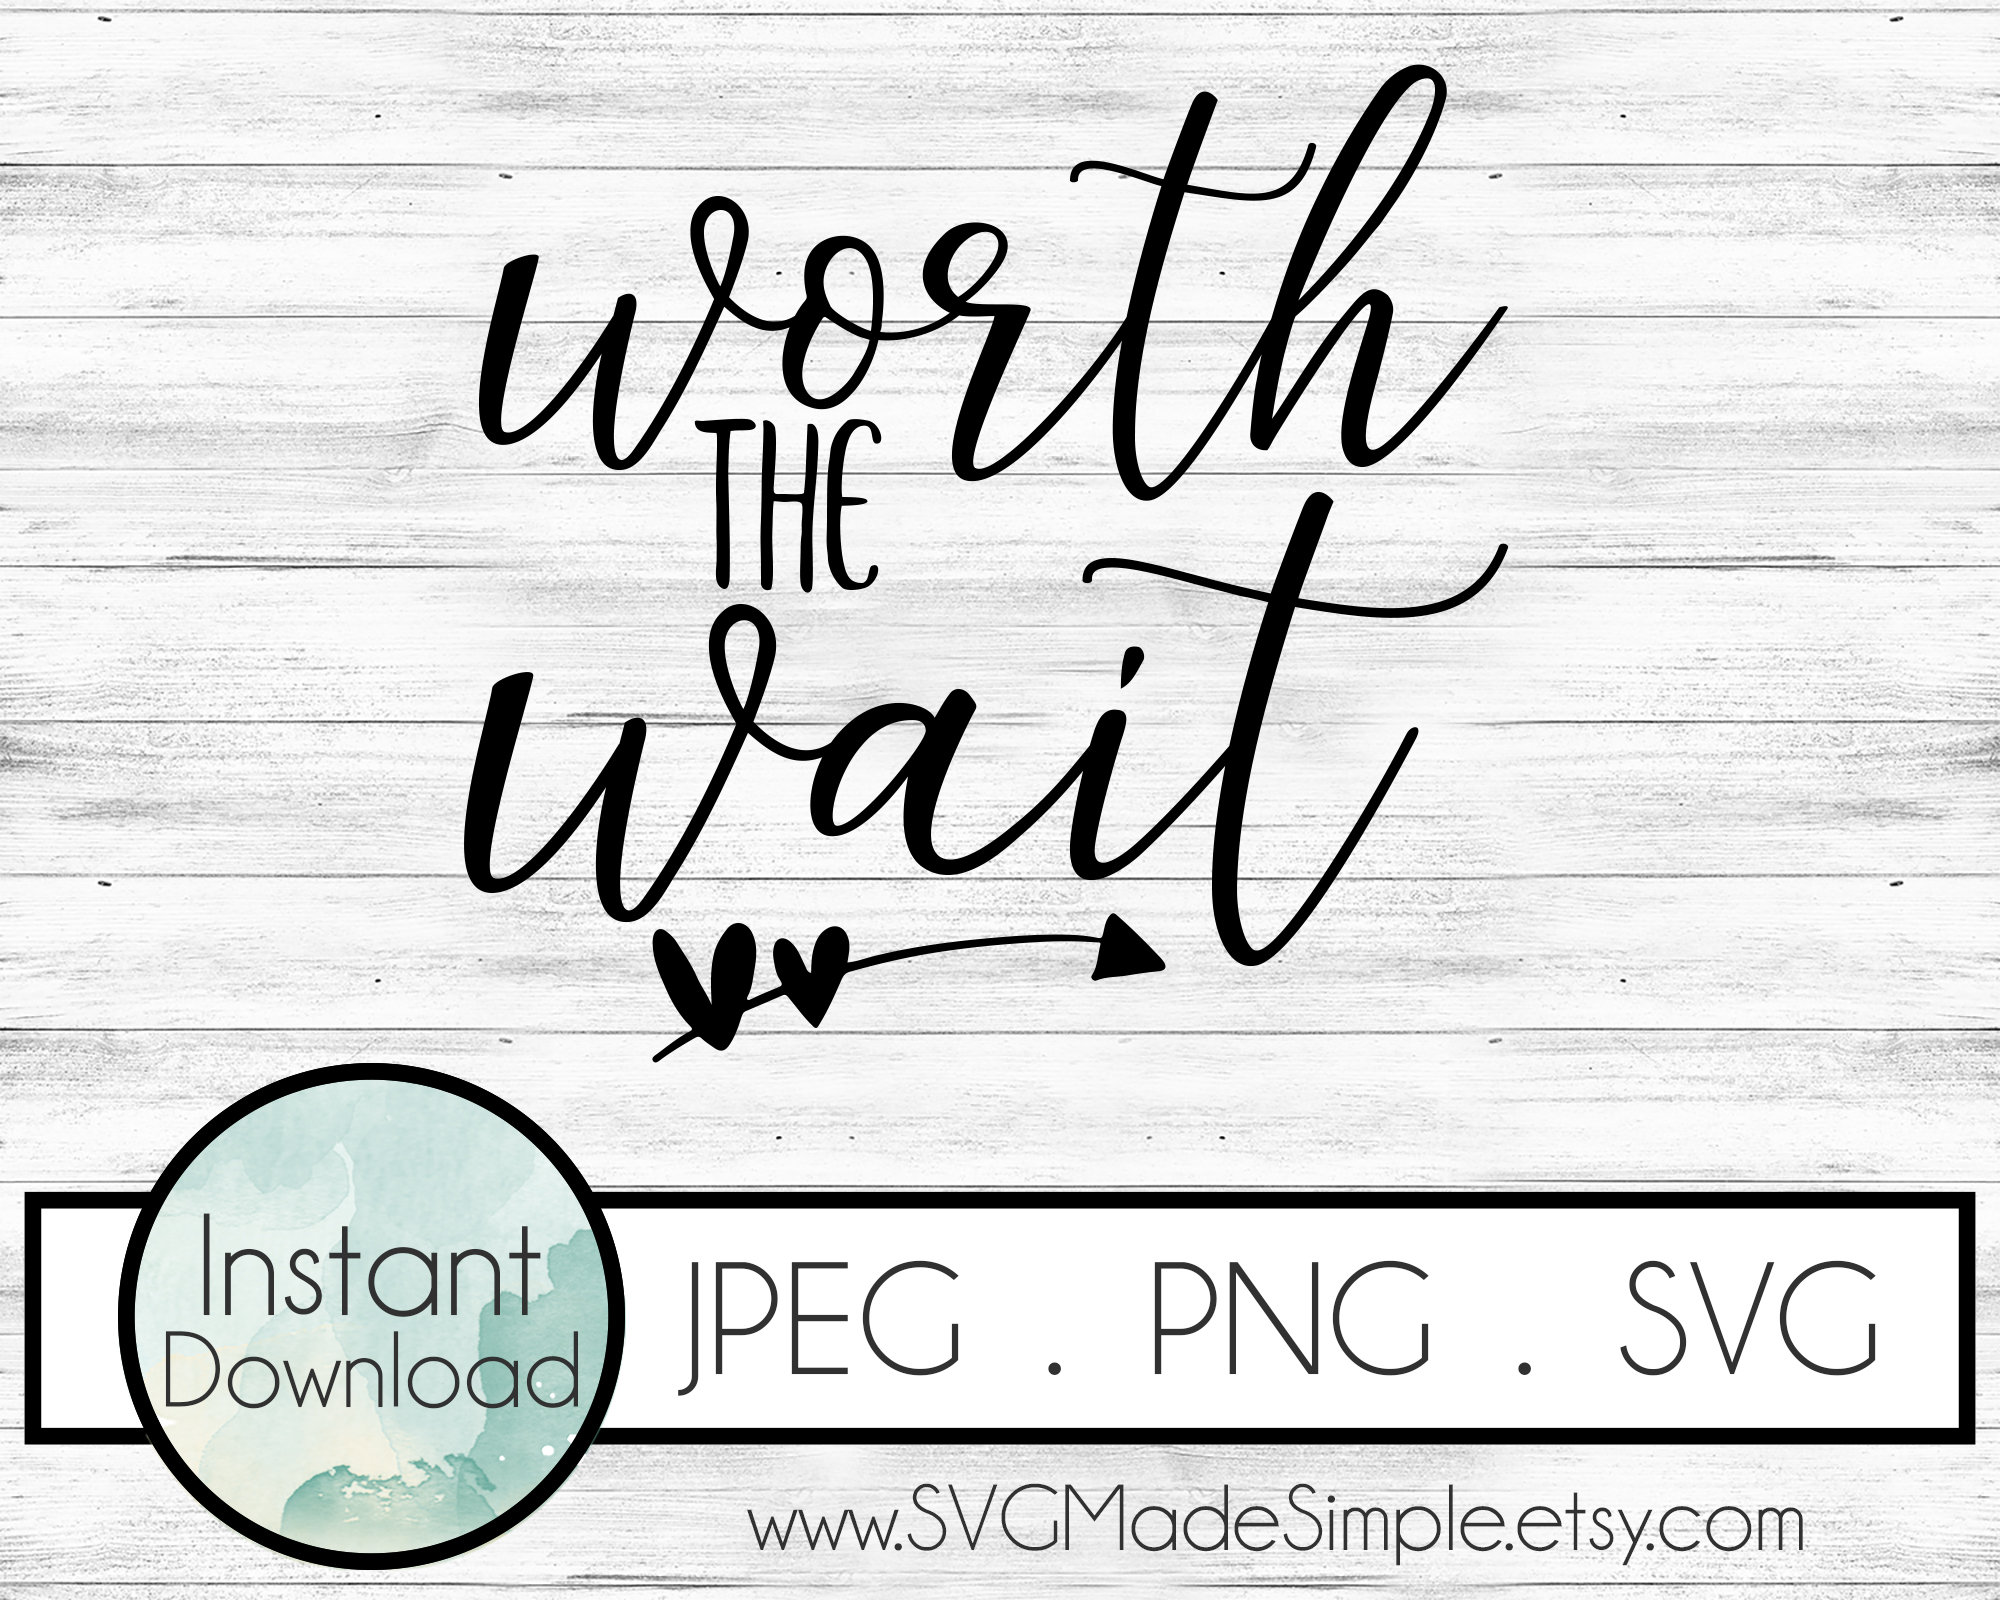 Worth the Wait SVG for Commercial Use and Instant Download - Etsy